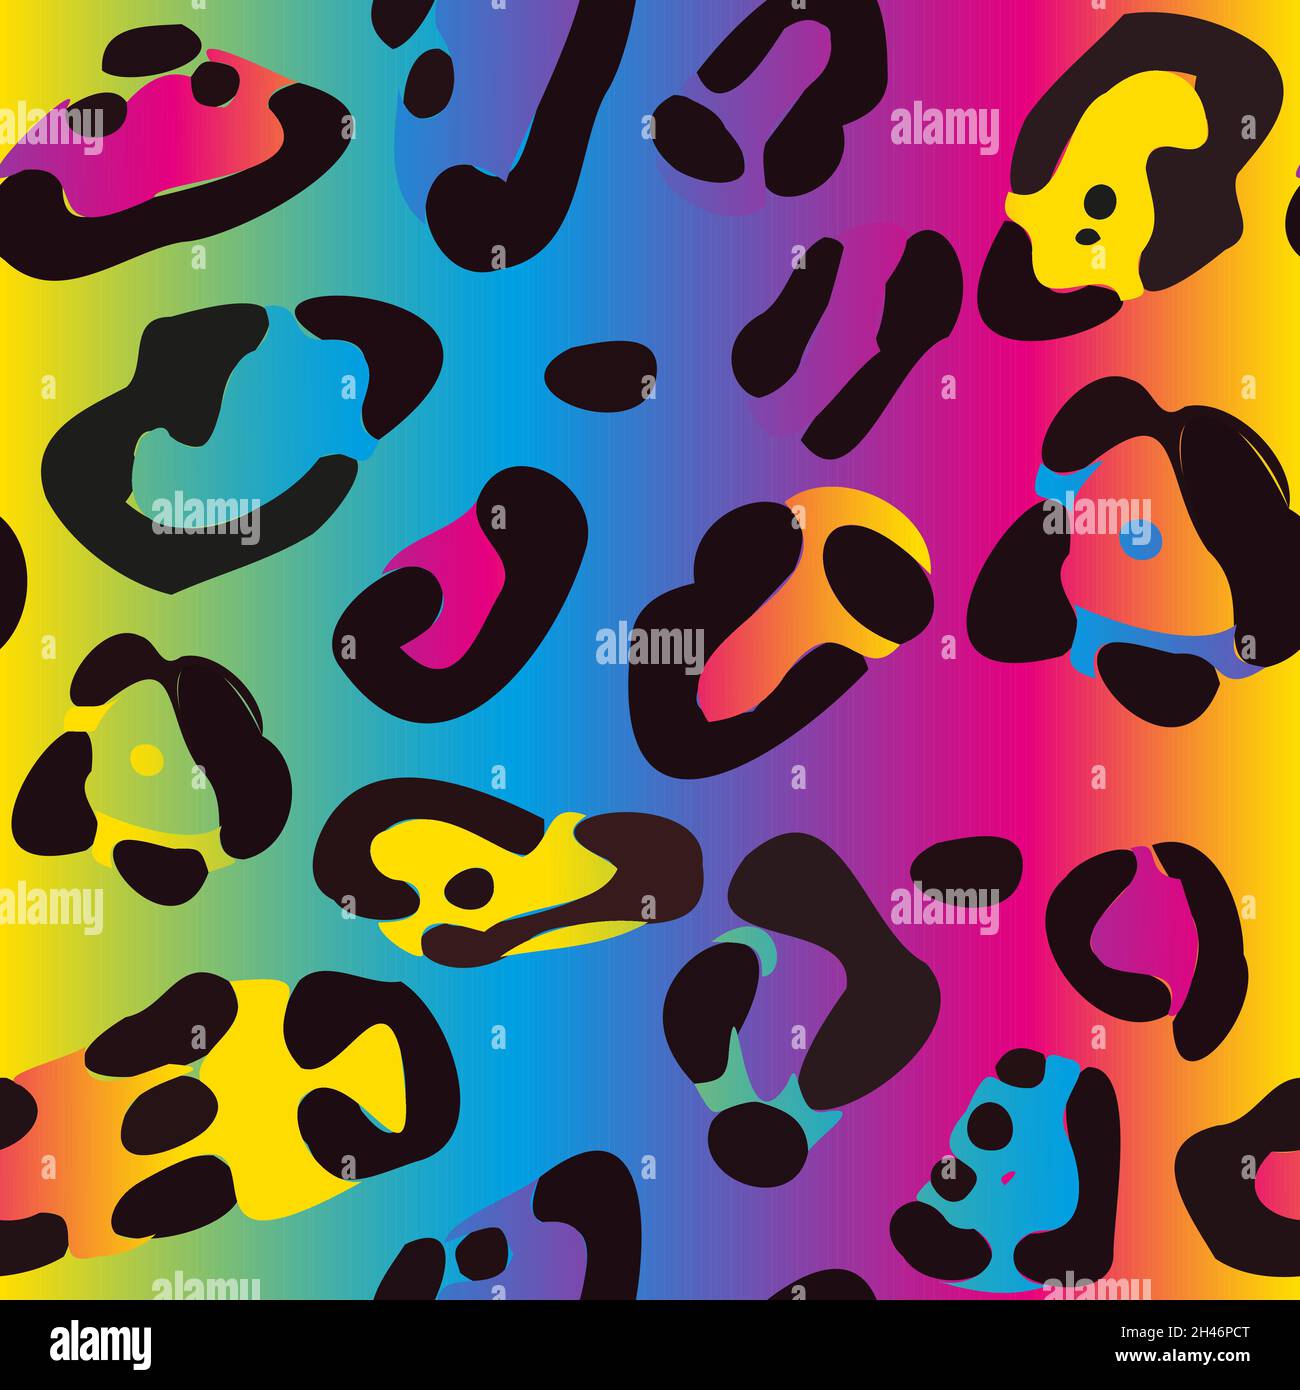 Rainbow leopard seamless pattern. Colorful neon vector background